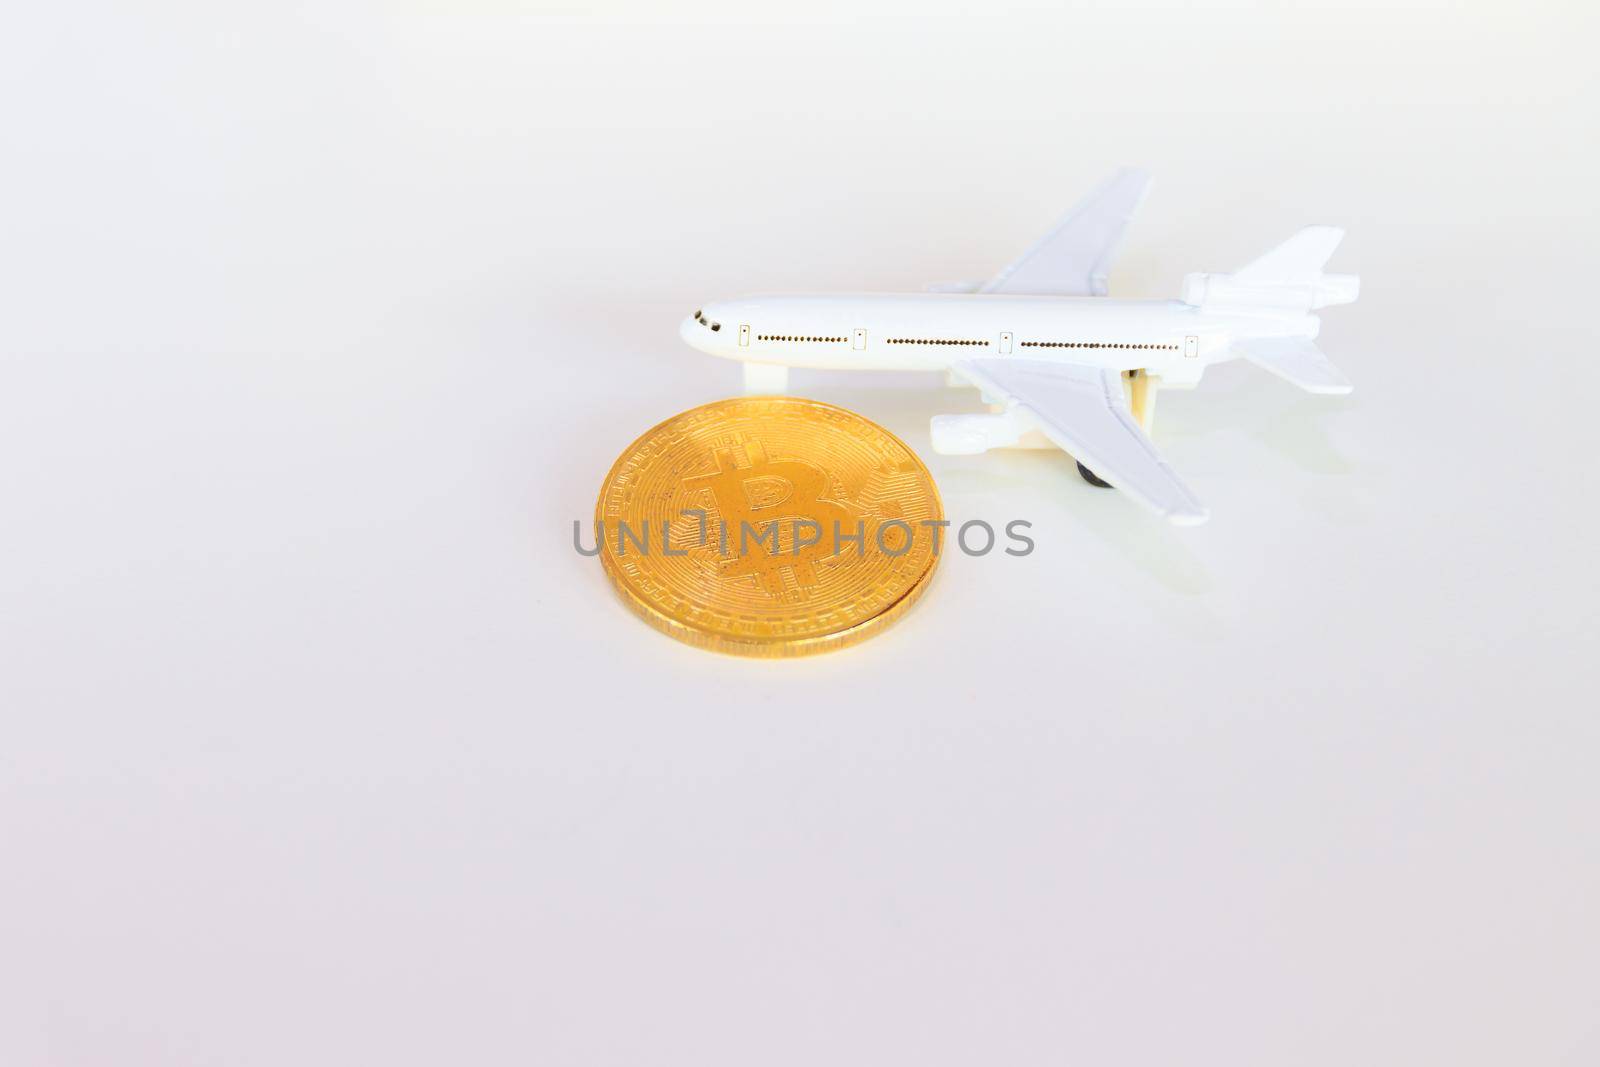 bitcoin coins and model of passenger plane  over white on black background. with copy space add text by pramot